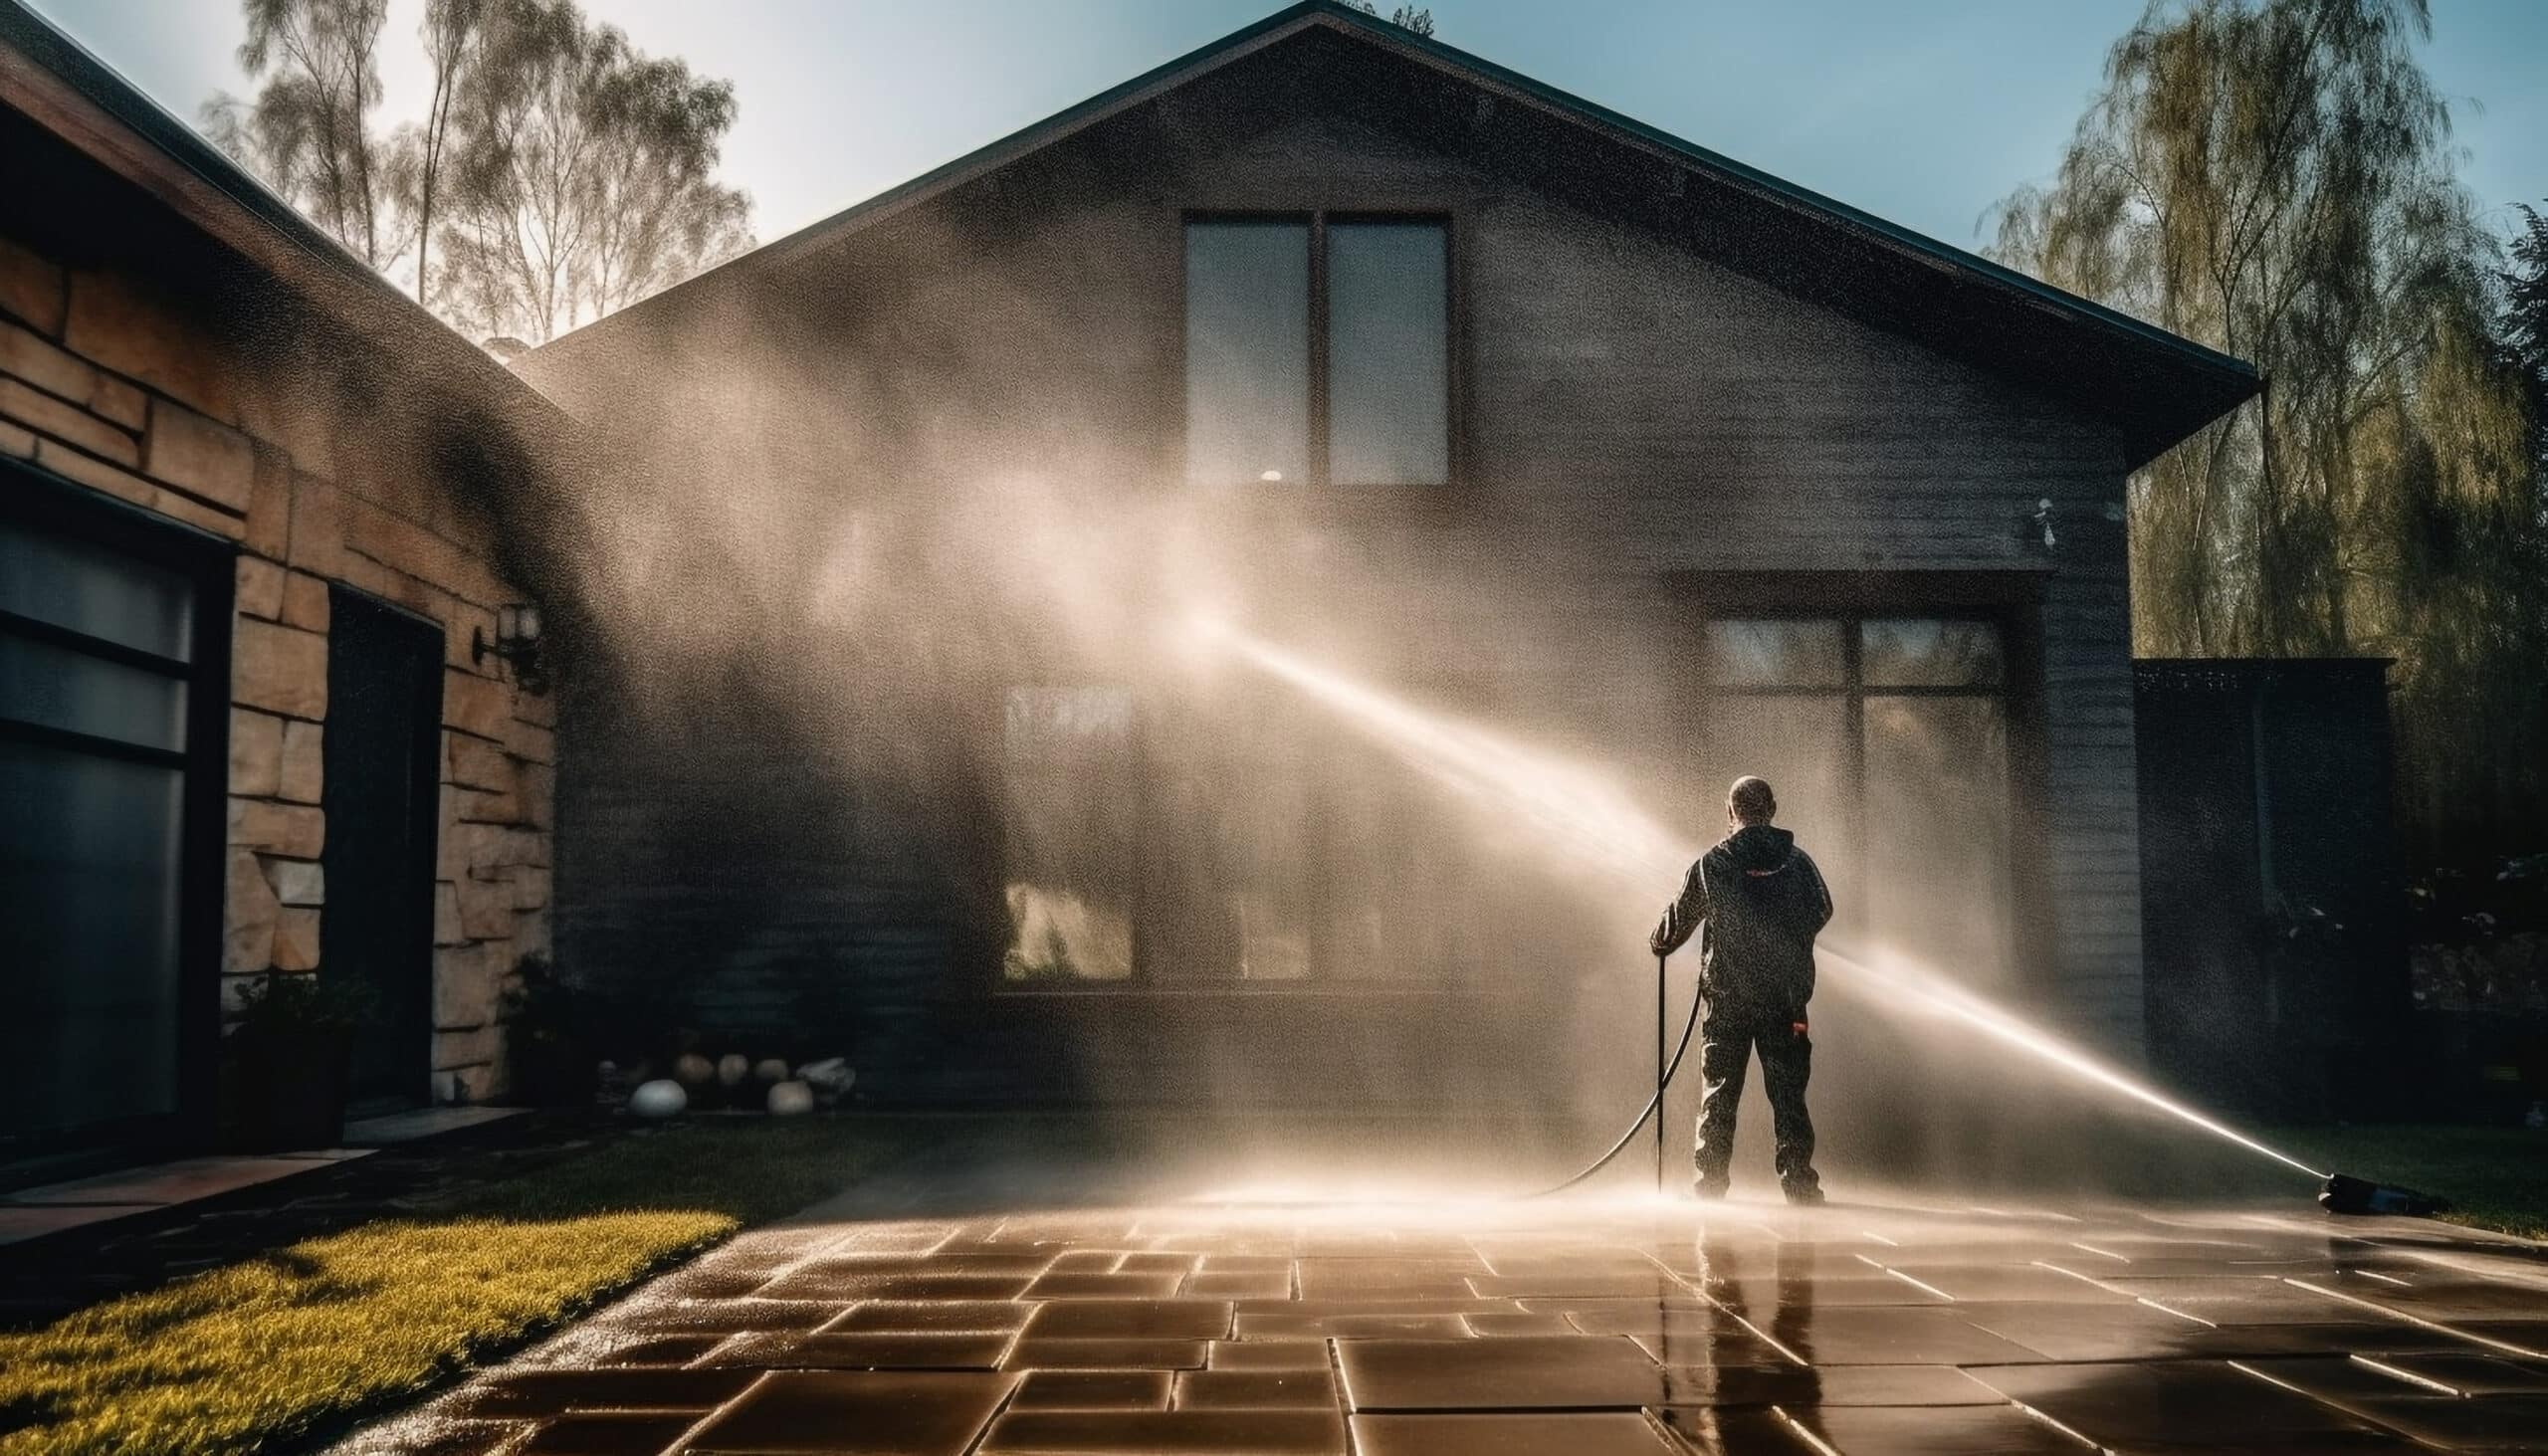 www.appr.com : Can I use well water with my electric pressure washer?